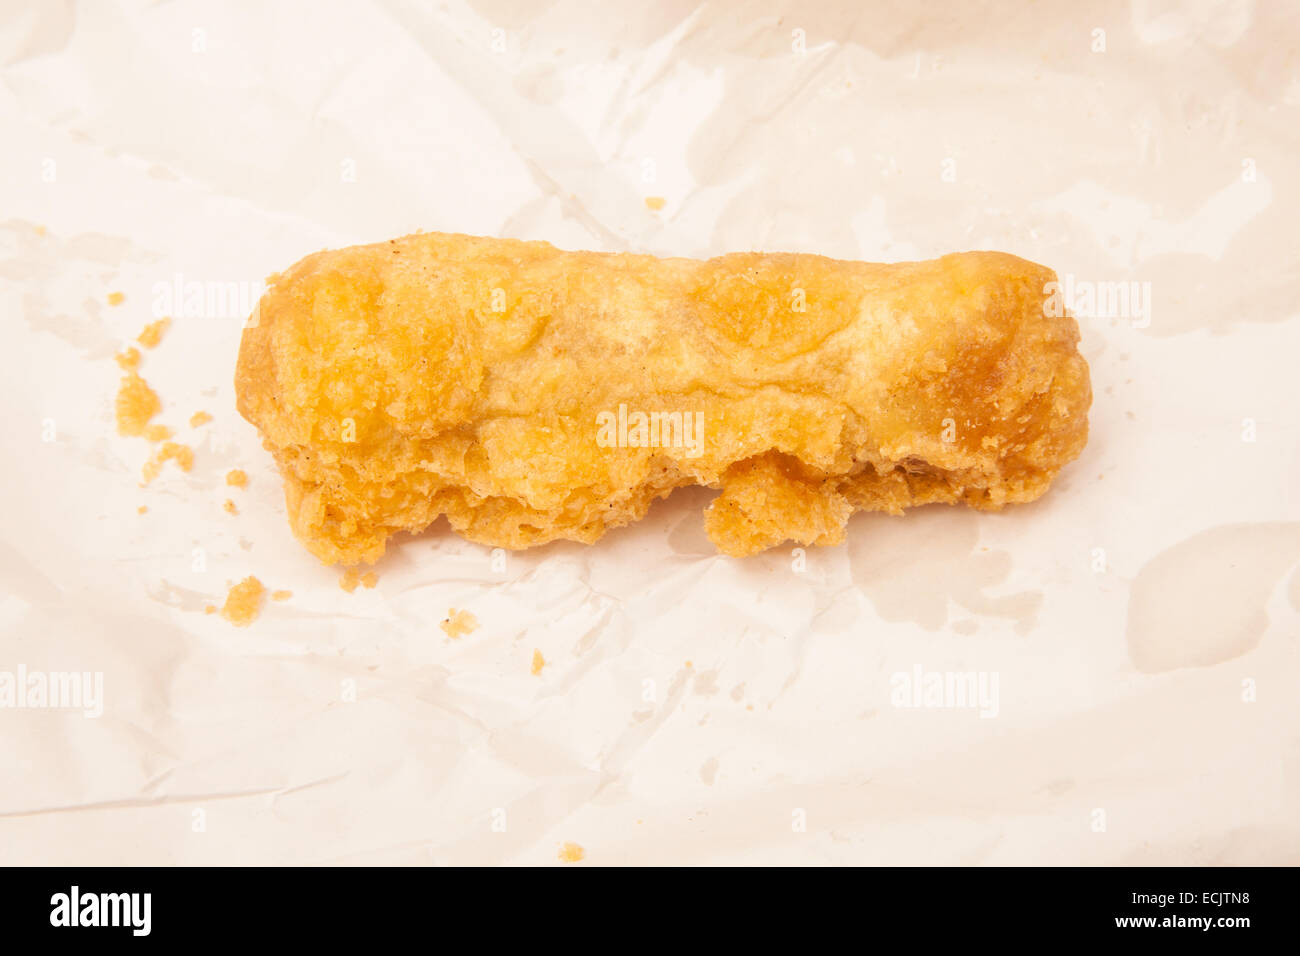 Deep fried pork sausage fresh from the fish and chip shop. Stock Photo